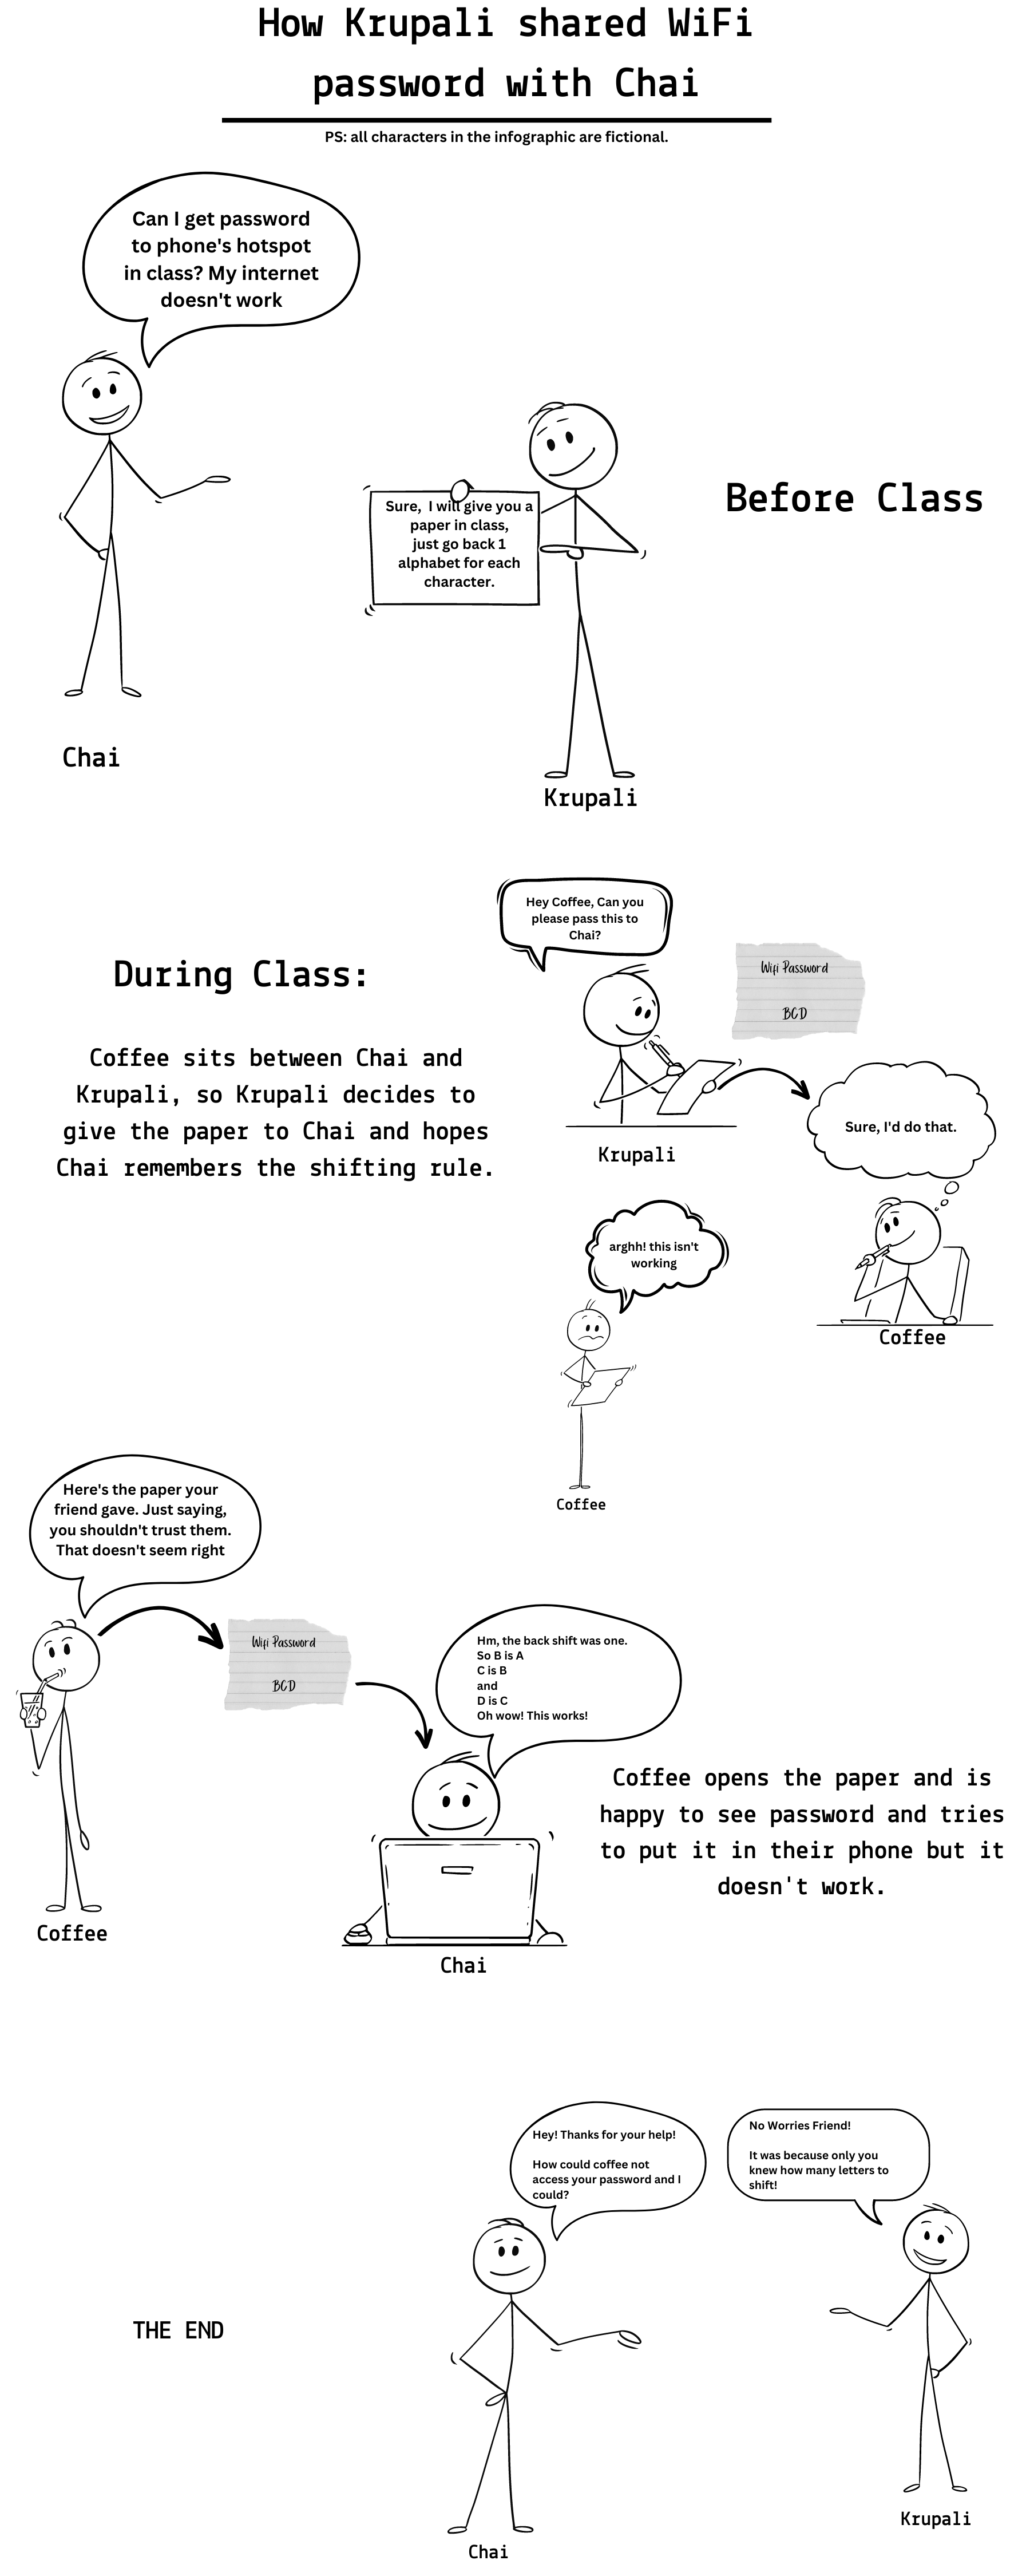 The following is an infographic that demonstrates the use of cryptography in simple words. The story is titled as "How Krupali shared Wifi password with Chai". Note that, Krupali, Chai and Coffee are three fictional characters in the story. The story starts with Chai asking for password of personal hotspot WiFi during the class and Krupali says that they'll pass a paper with password and Chai should shift one alphabet back to what is written. In class, Coffee sits between Chai and Krupali, Krupali pases a paper with password written as 'BCD' and tells Coffee to pass it. Coffee in-between tries to access the WiFi putting the password but it doesn't work and so they pass it to Chai. Chai remembers to shift one letter back and the password becomes "ABC" which works on their laptop. After class, Chai asks Krupali on how could Coffee not access the WiFi, Krupali replies that it was because only the two of them knew the shift and so nobody else could access it.